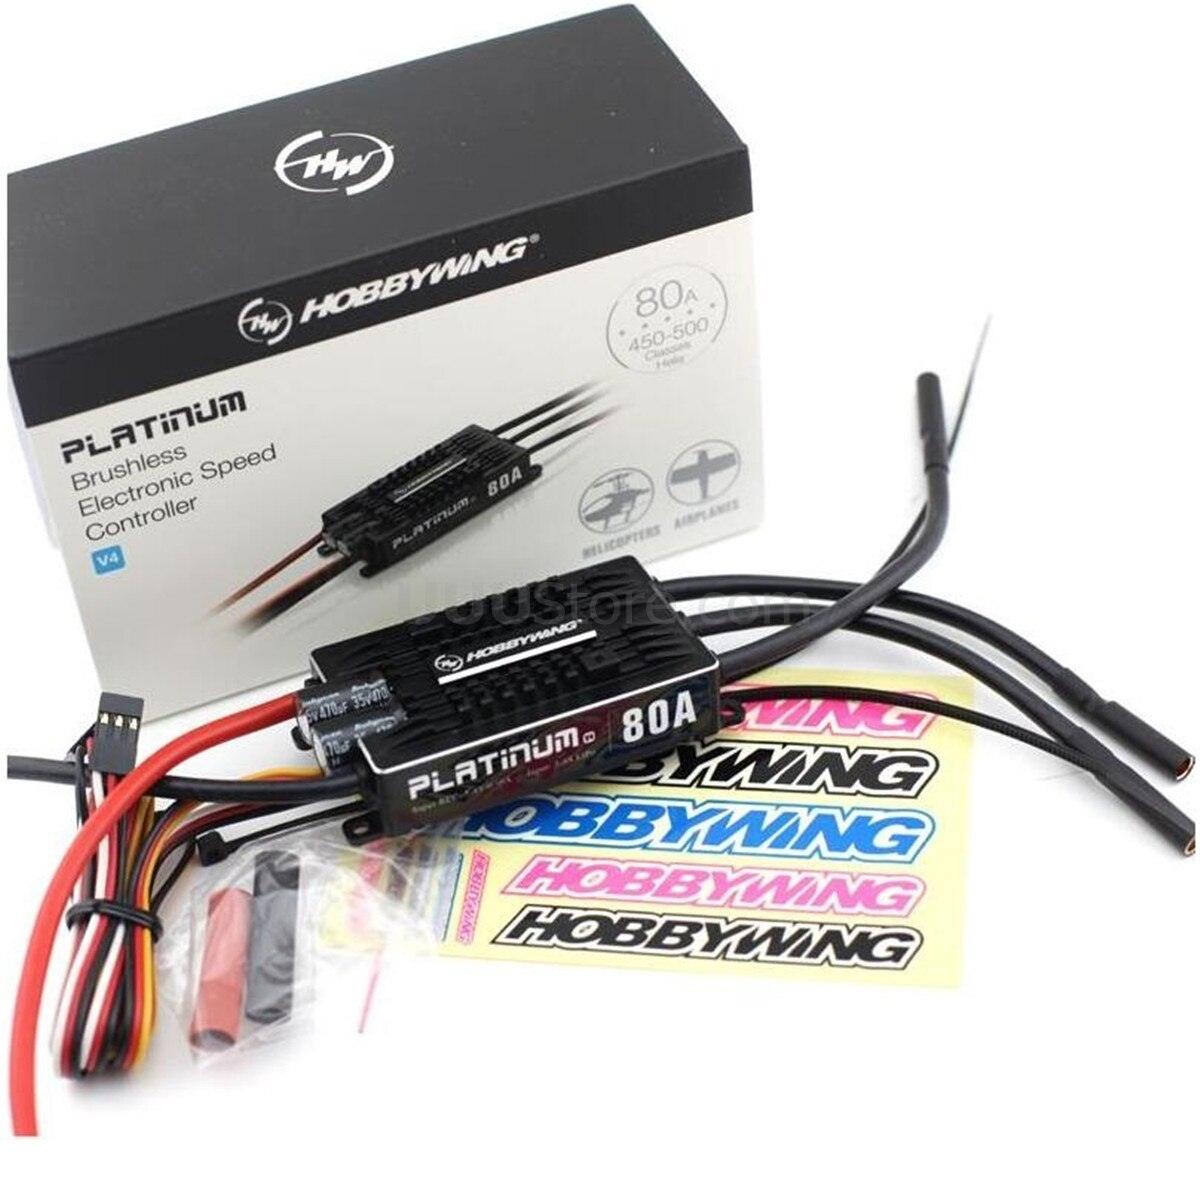 HobbyWing Platinum 80A V4  ESC, ESC for 3S-6S BEC, 5-8V and 10A in 450L-500 class helicopters.